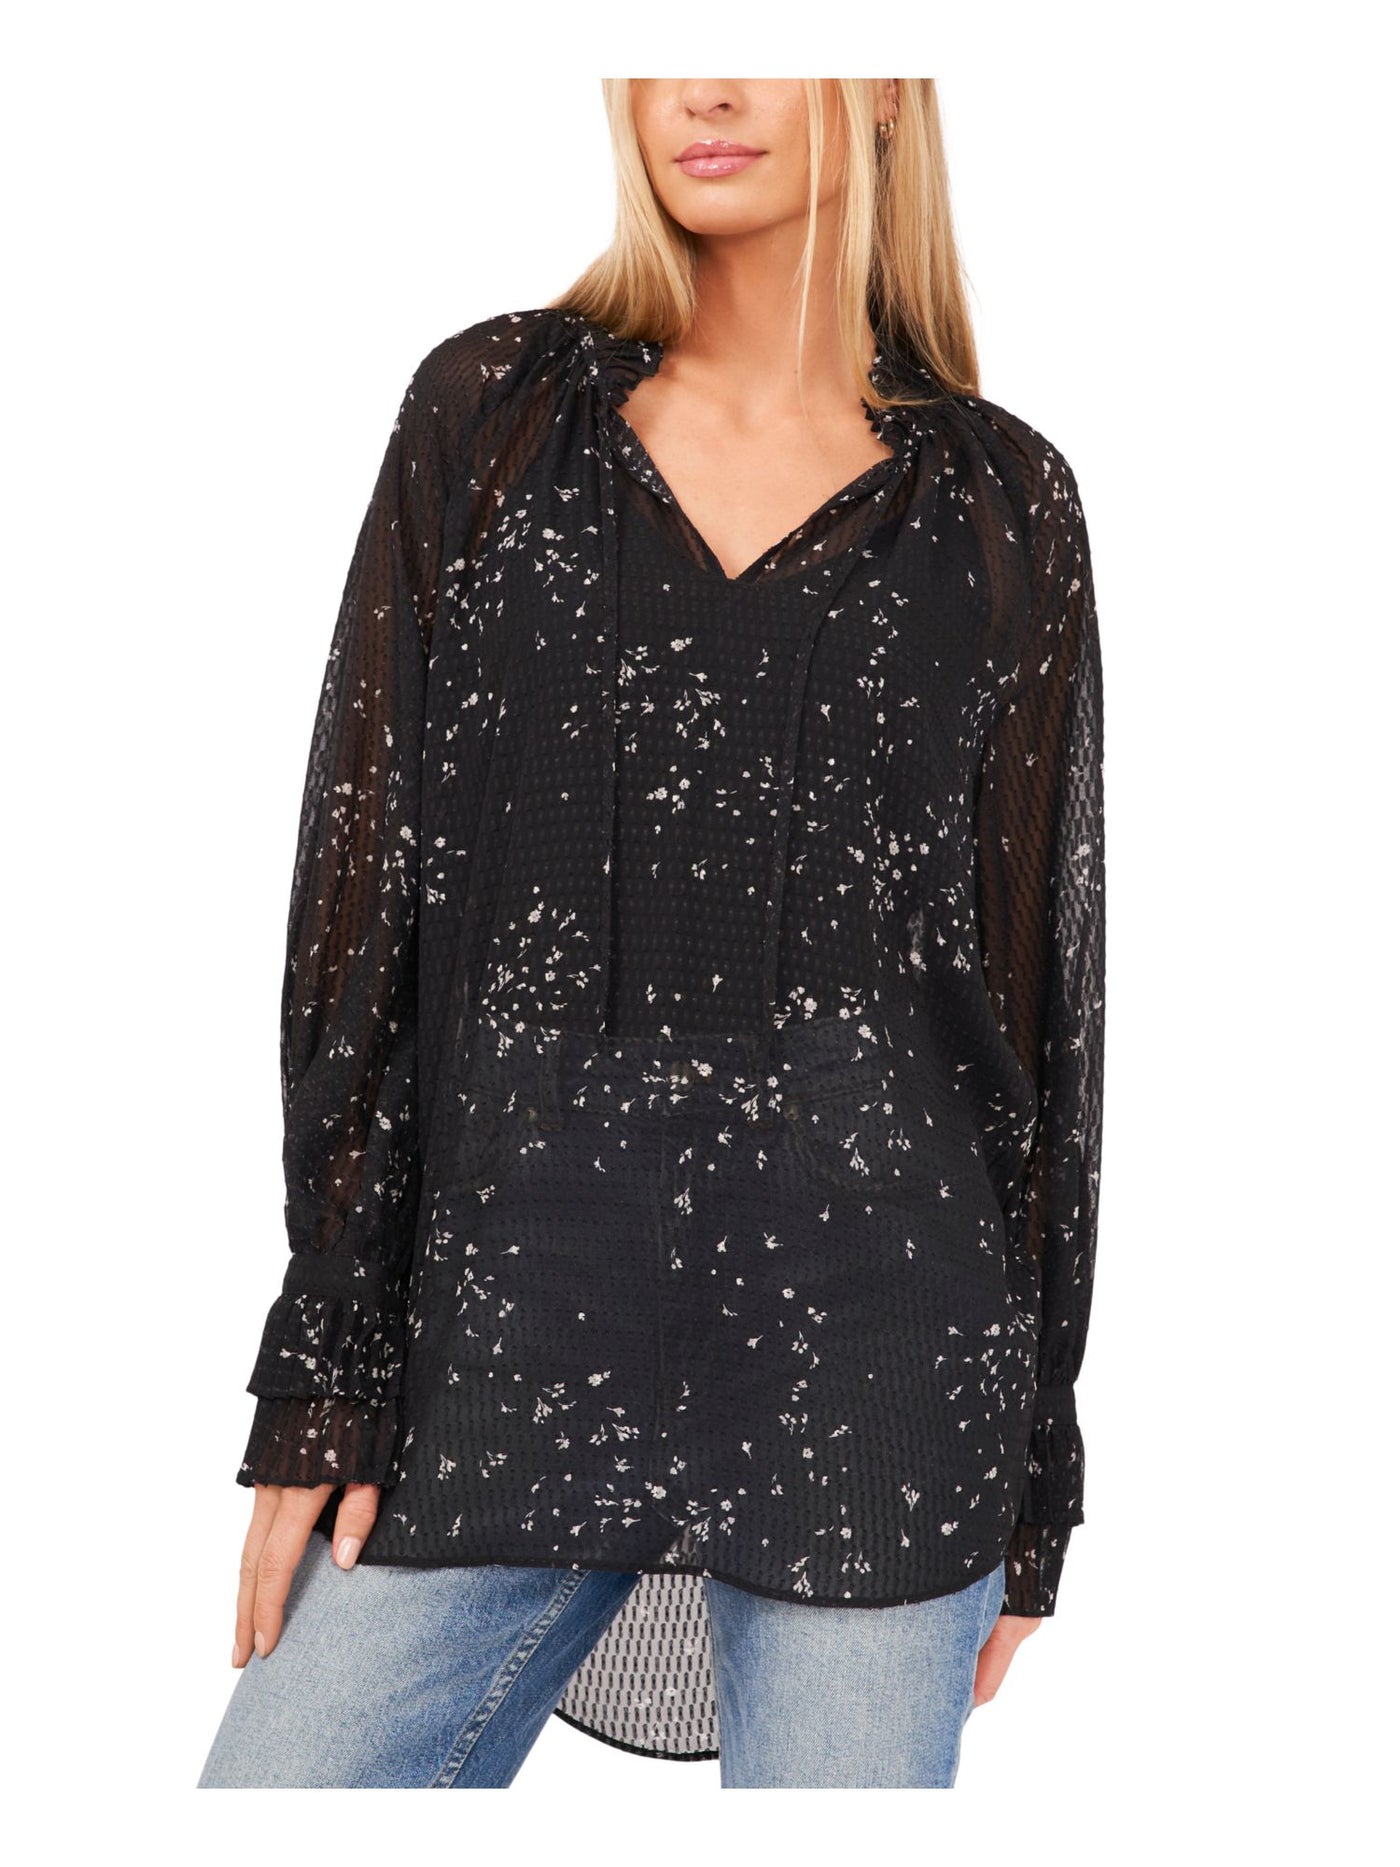 VINCE CAMUTO Womens Black Sheer Floral Long Sleeve V Neck Tunic Top XXS